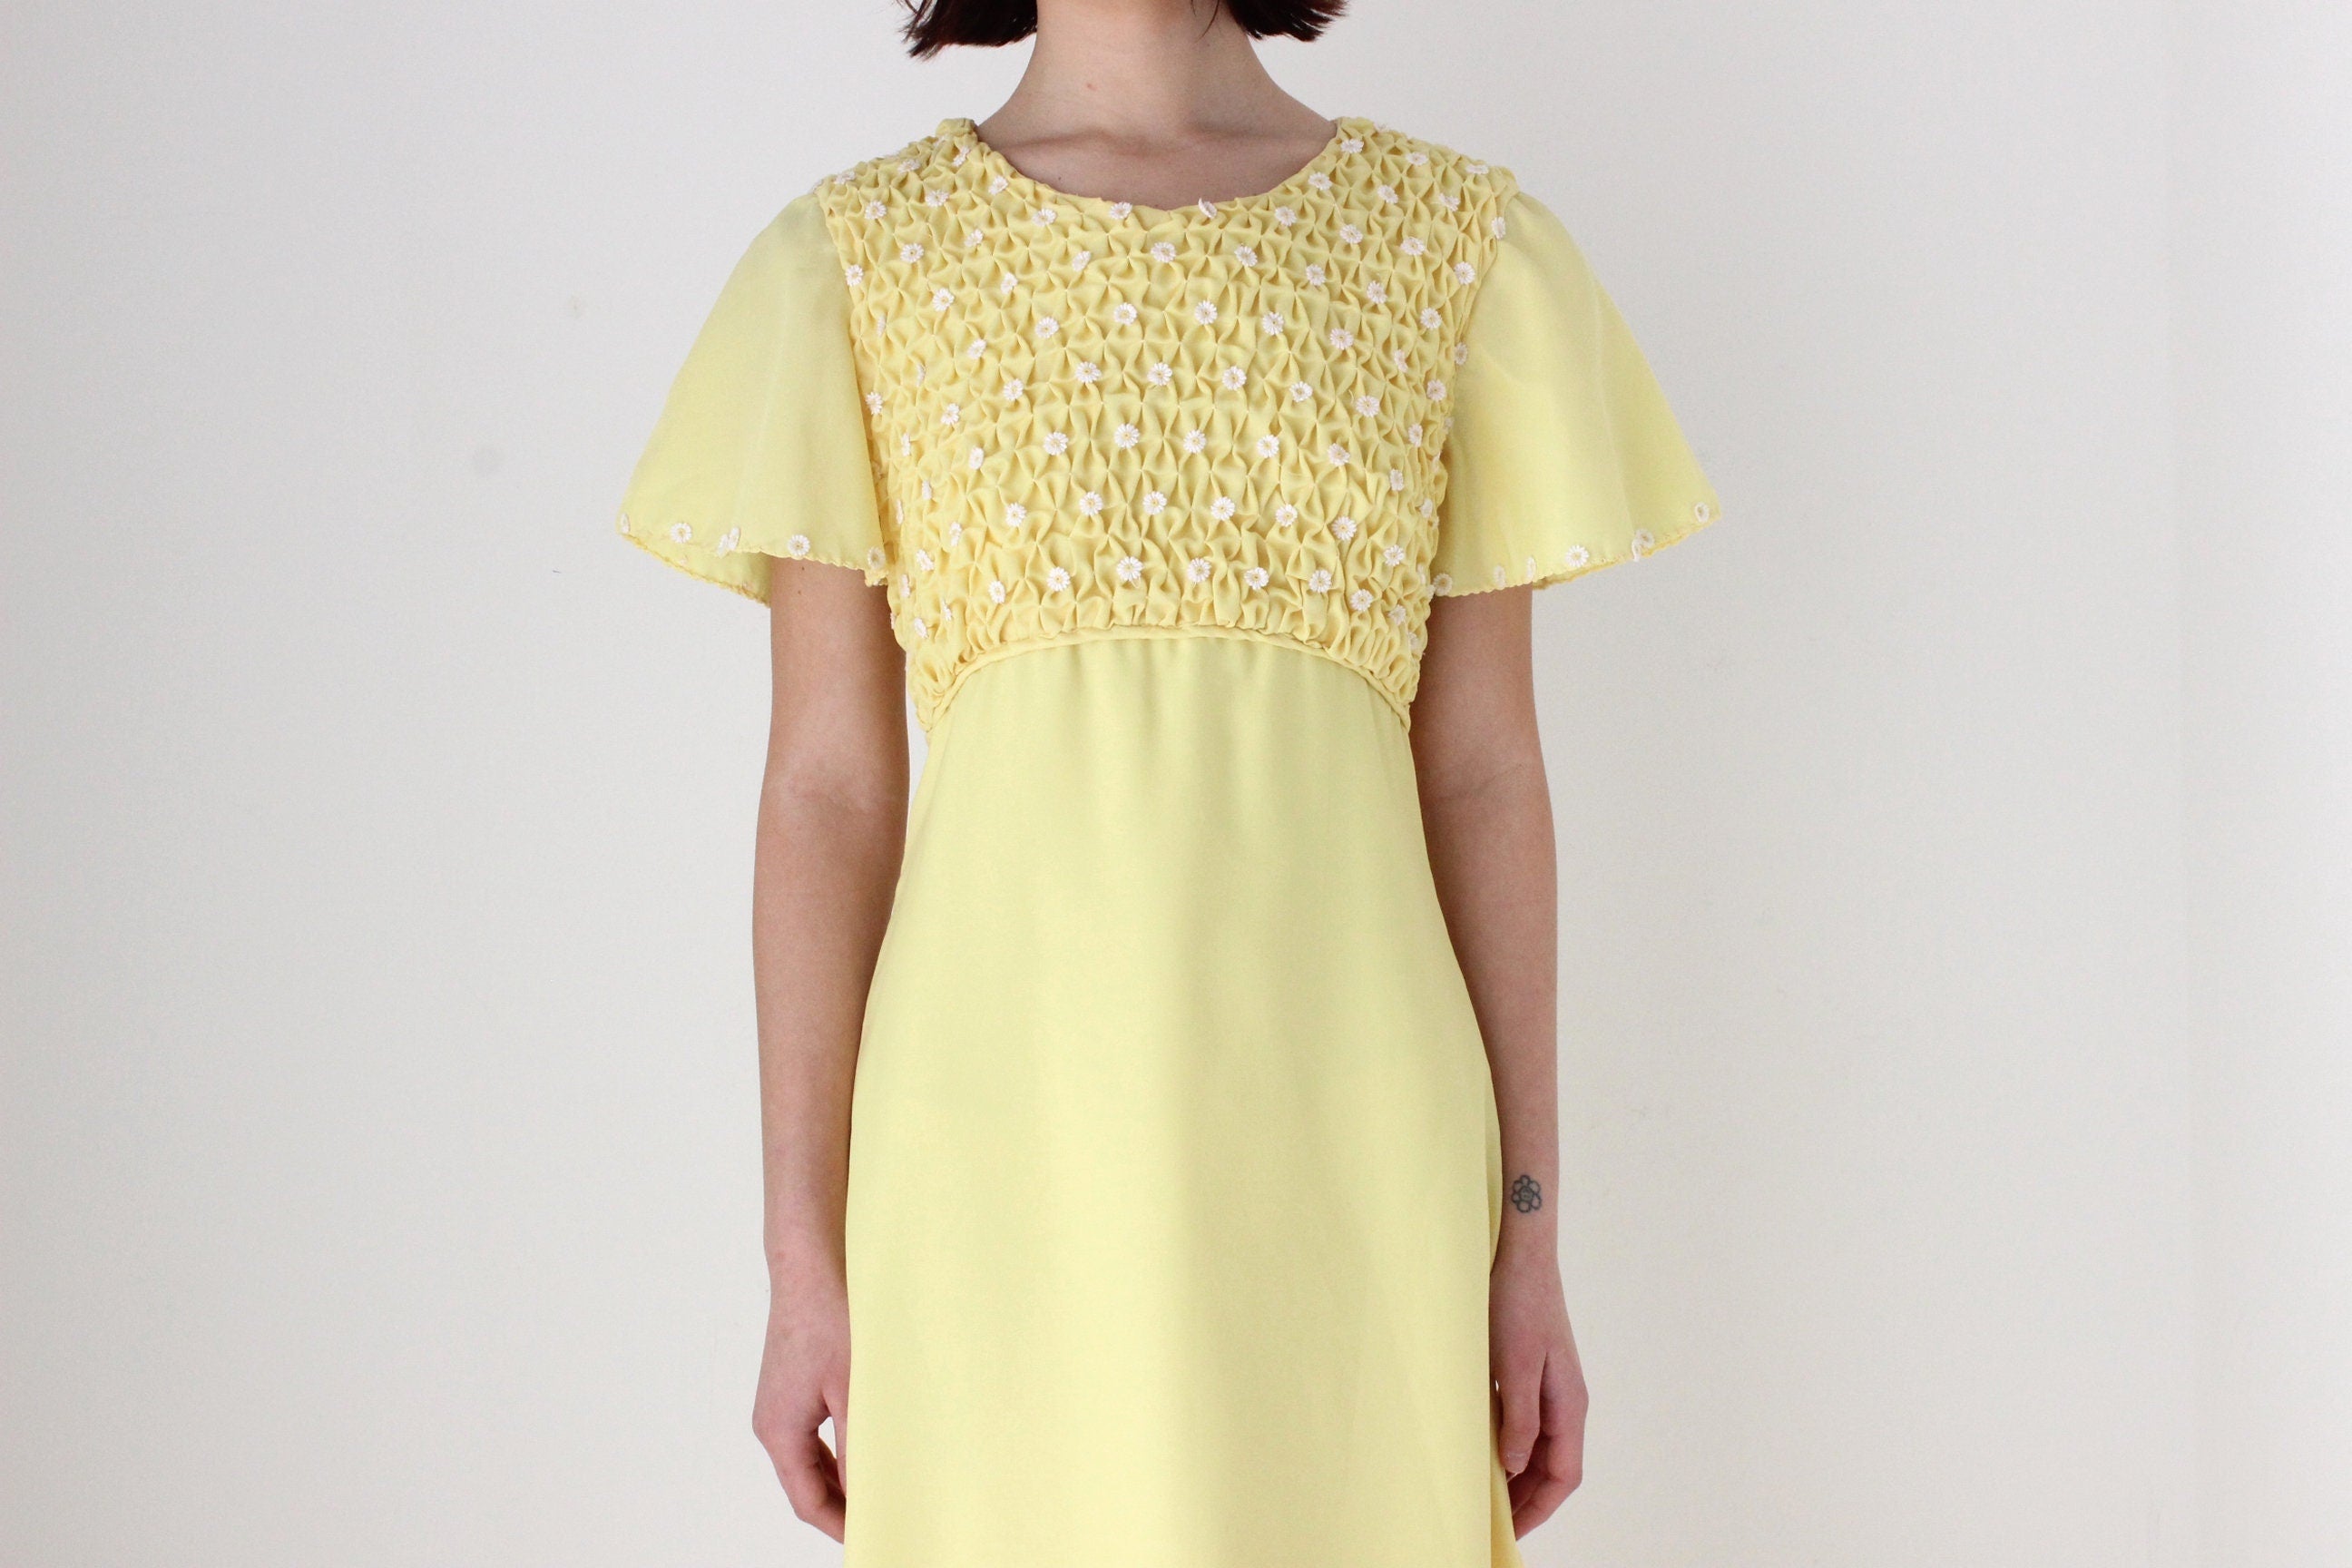 70s Hand Smocked Dress w/ Cotton Daisies